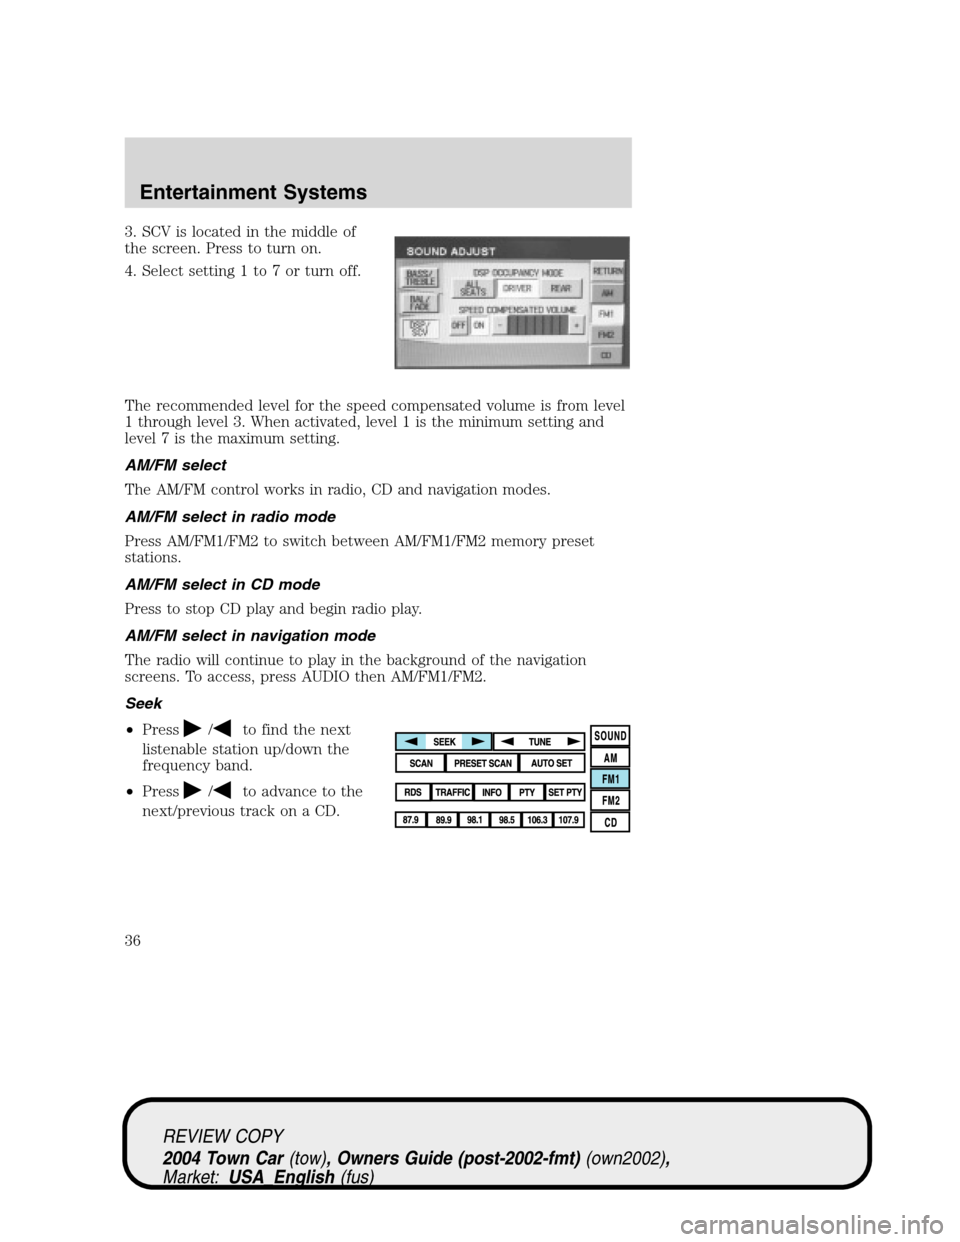 LINCOLN TOWN CAR 2004 Owners Guide 3. SCV is located in the middle of
the screen. Press to turn on.
4. Select setting 1 to 7 or turn off.
The recommended level for the speed compensated volume is from level
1 through level 3. When acti